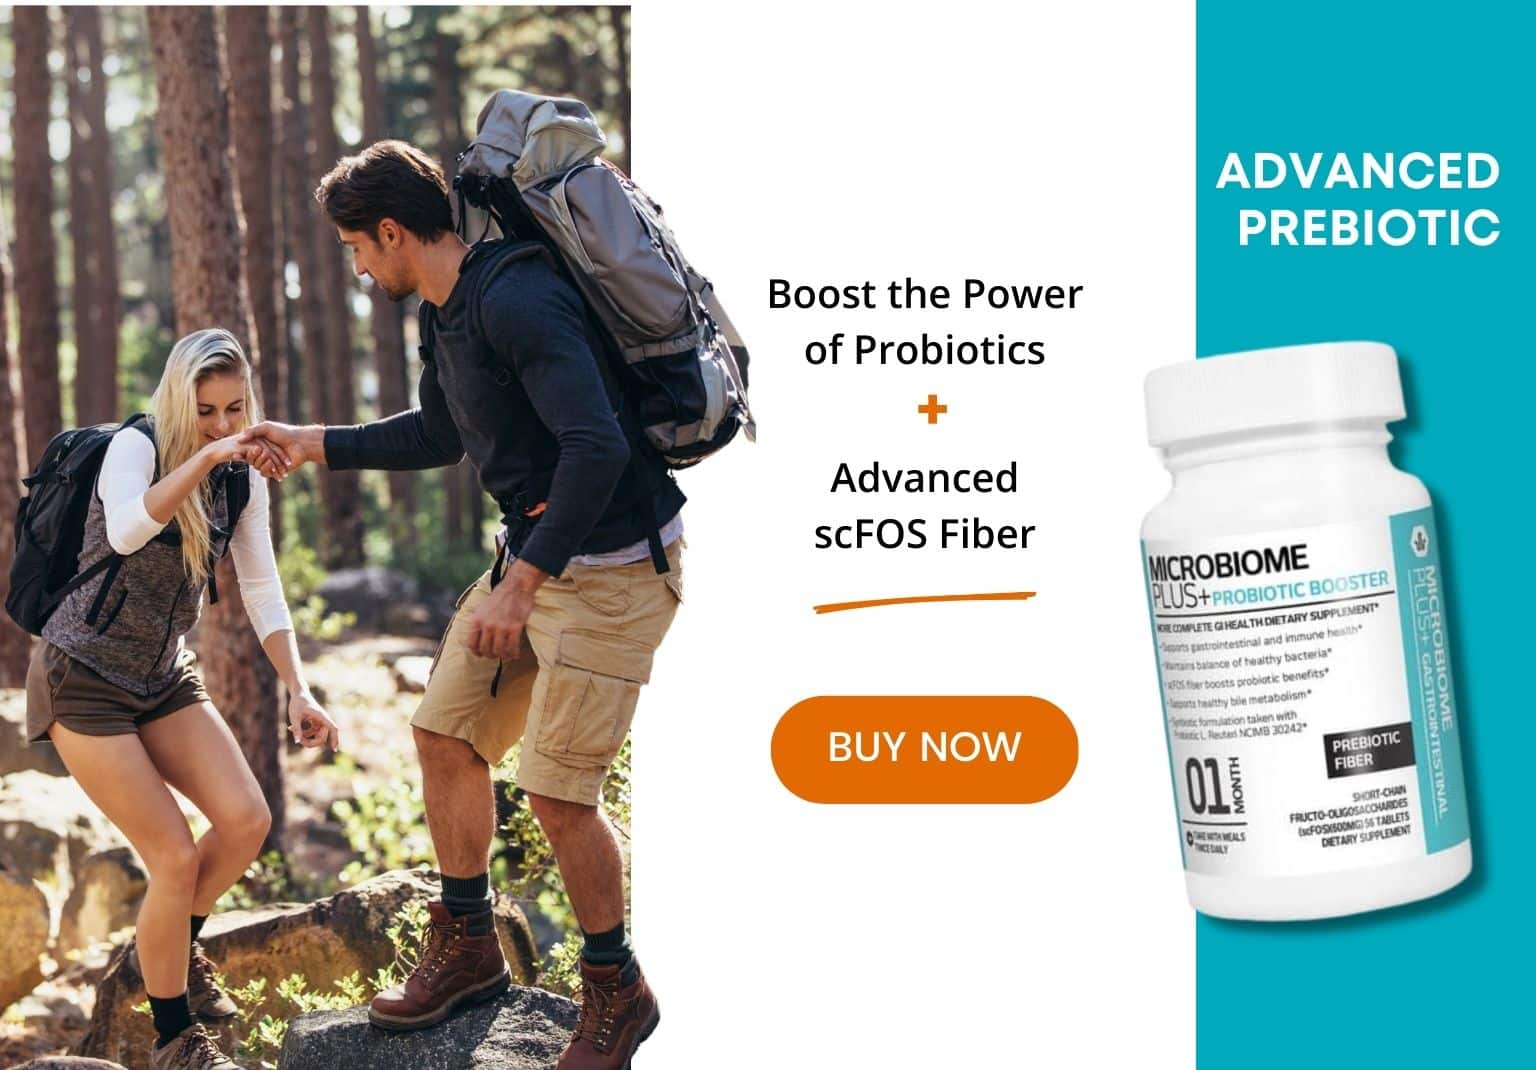 Microbiome Plus+ is the number 1 probiotic for heart health